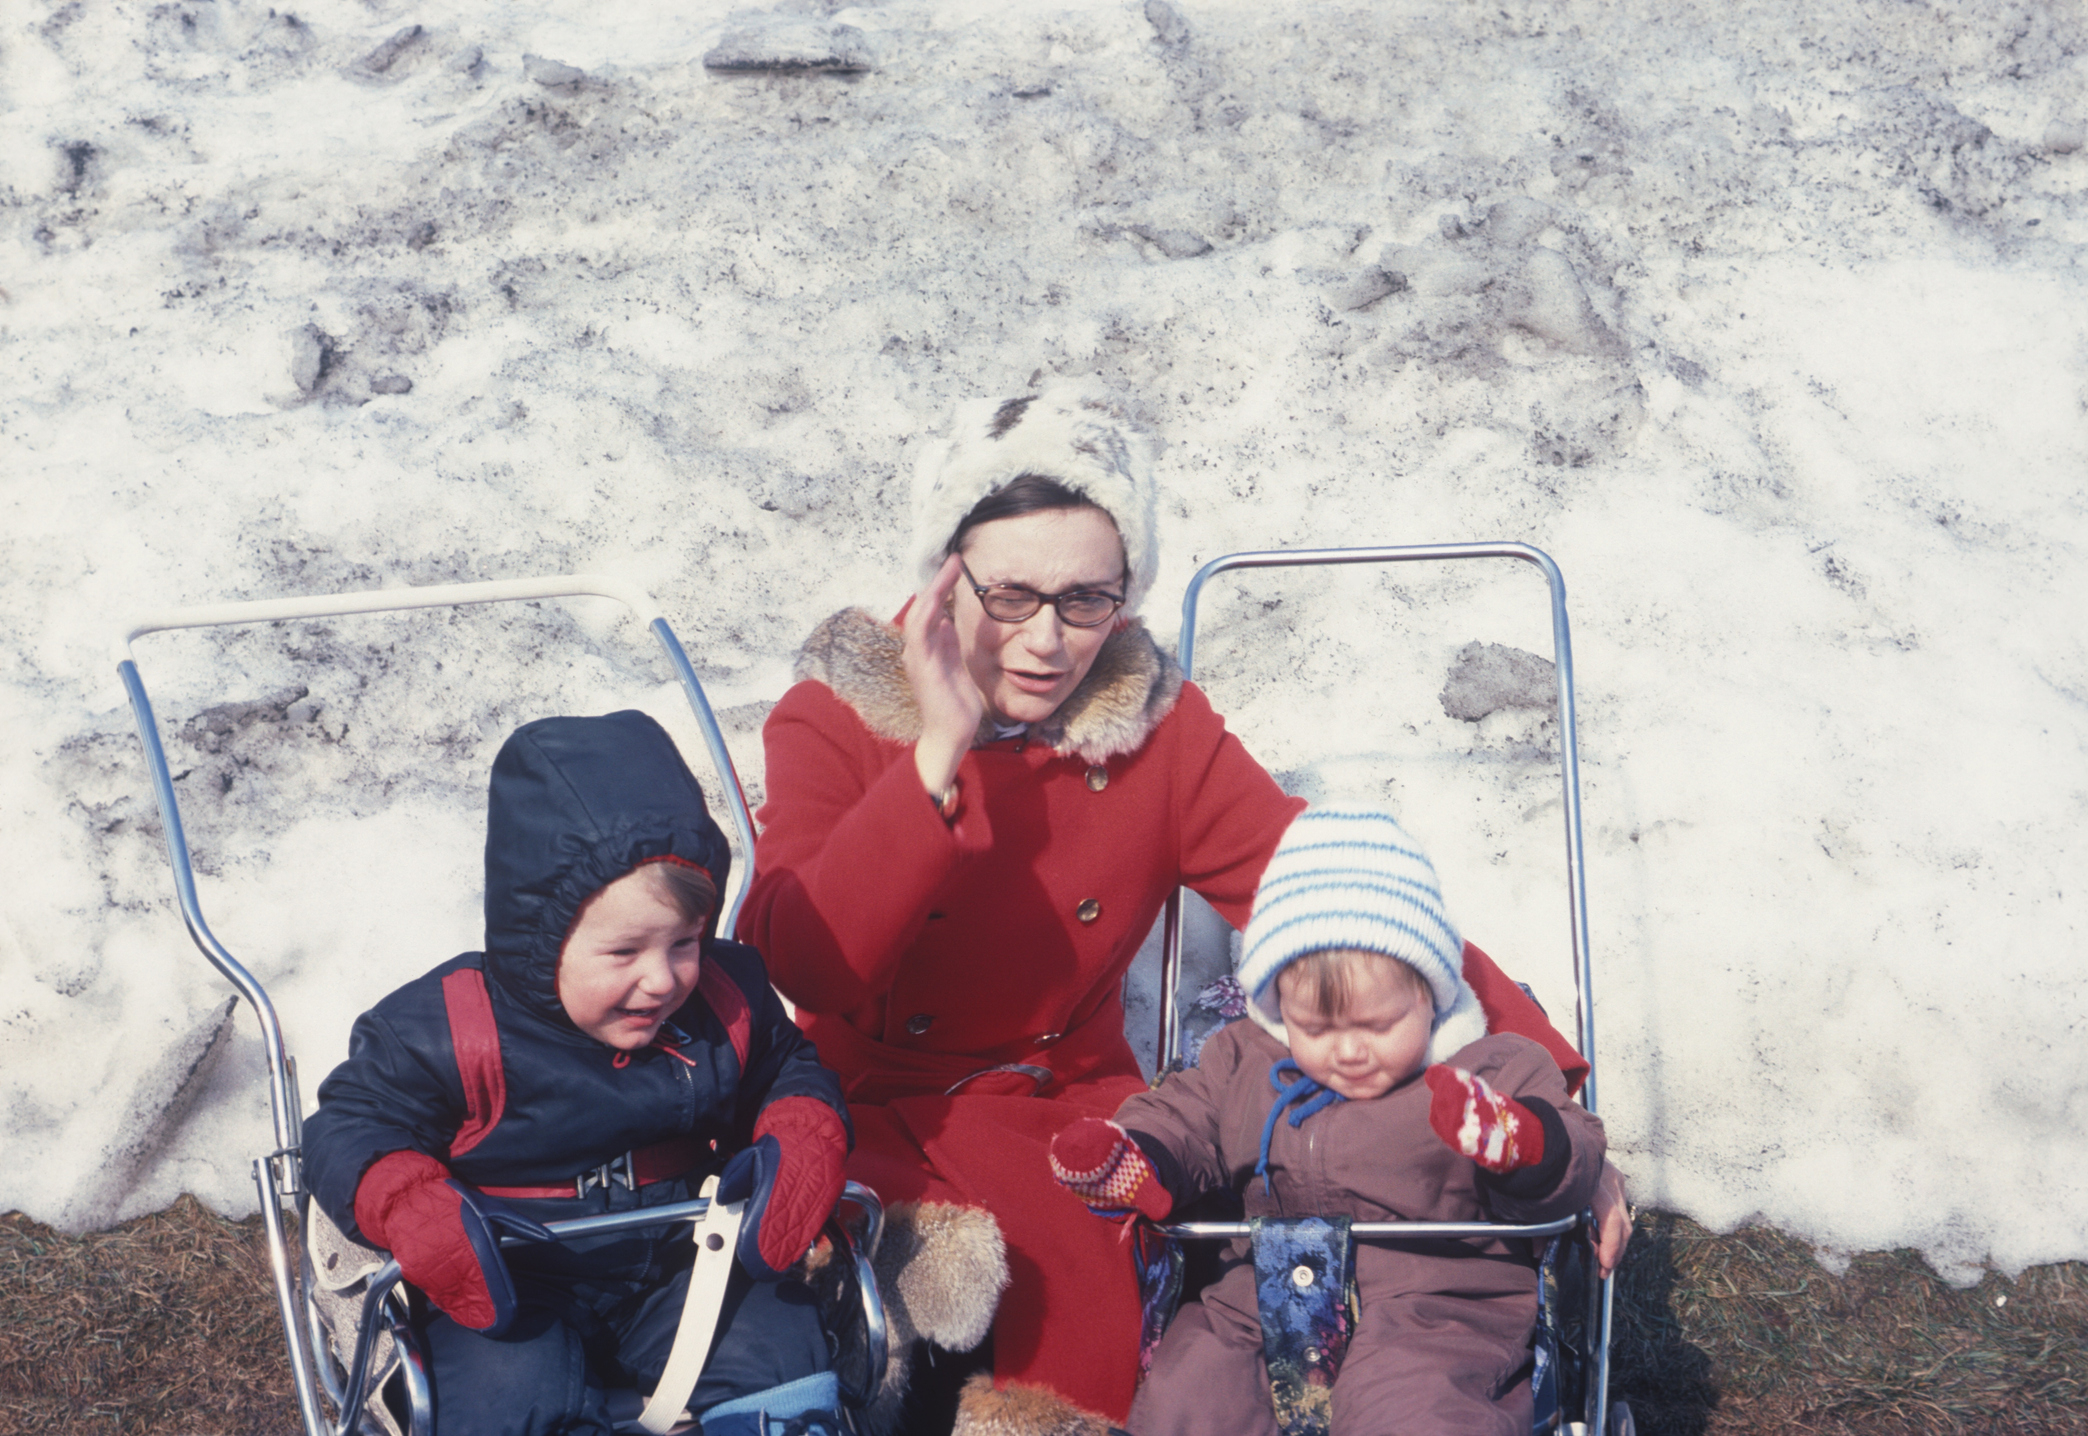 Woman seated between two children in sleds on snow, all wearing winter attire